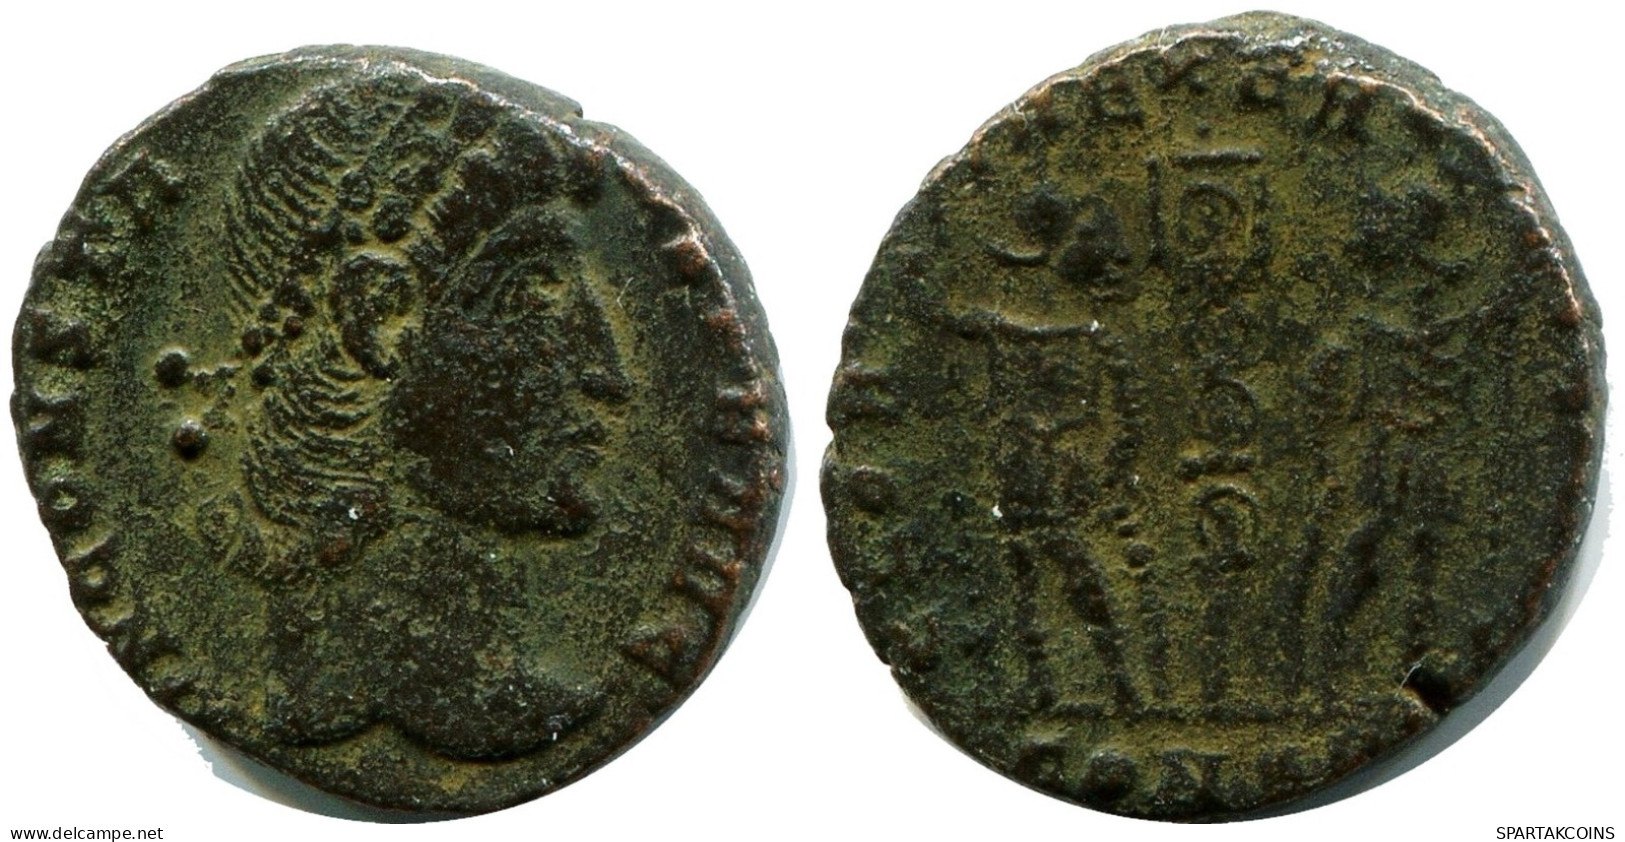 CONSTANS MINTED IN CONSTANTINOPLE FROM THE ROYAL ONTARIO MUSEUM #ANC11921.14.E.A - L'Empire Chrétien (307 à 363)